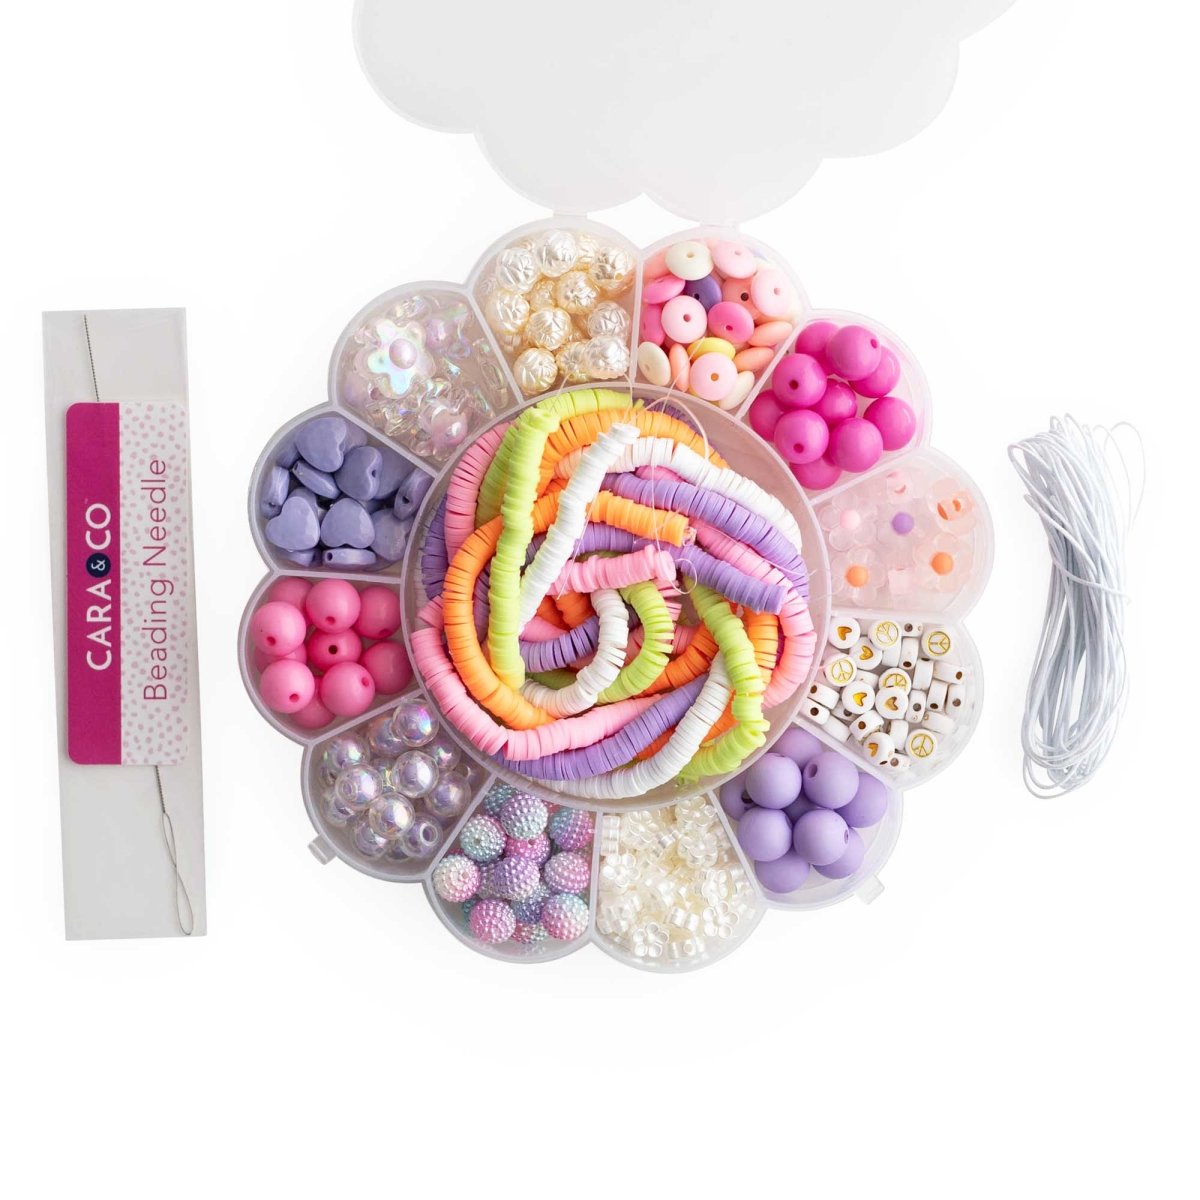 Acrylic Craft Kits Cotton Candy Dreams from Cara & Co Craft Supply